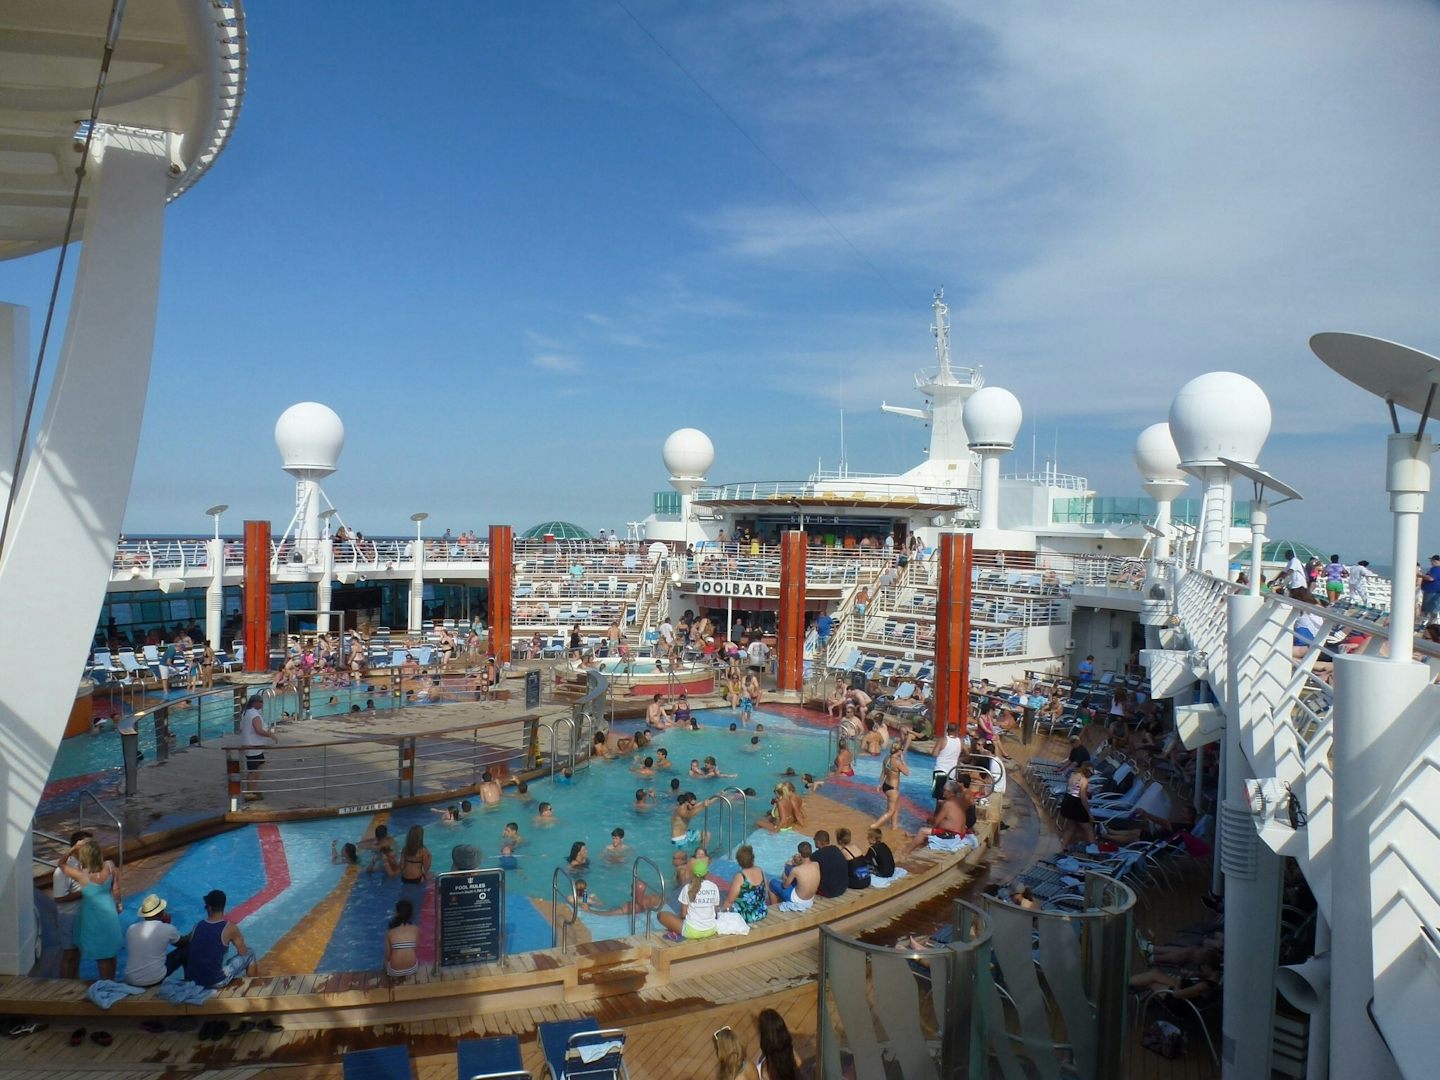 Pool , often very busy ,  hard to get a sun lounger went at sea